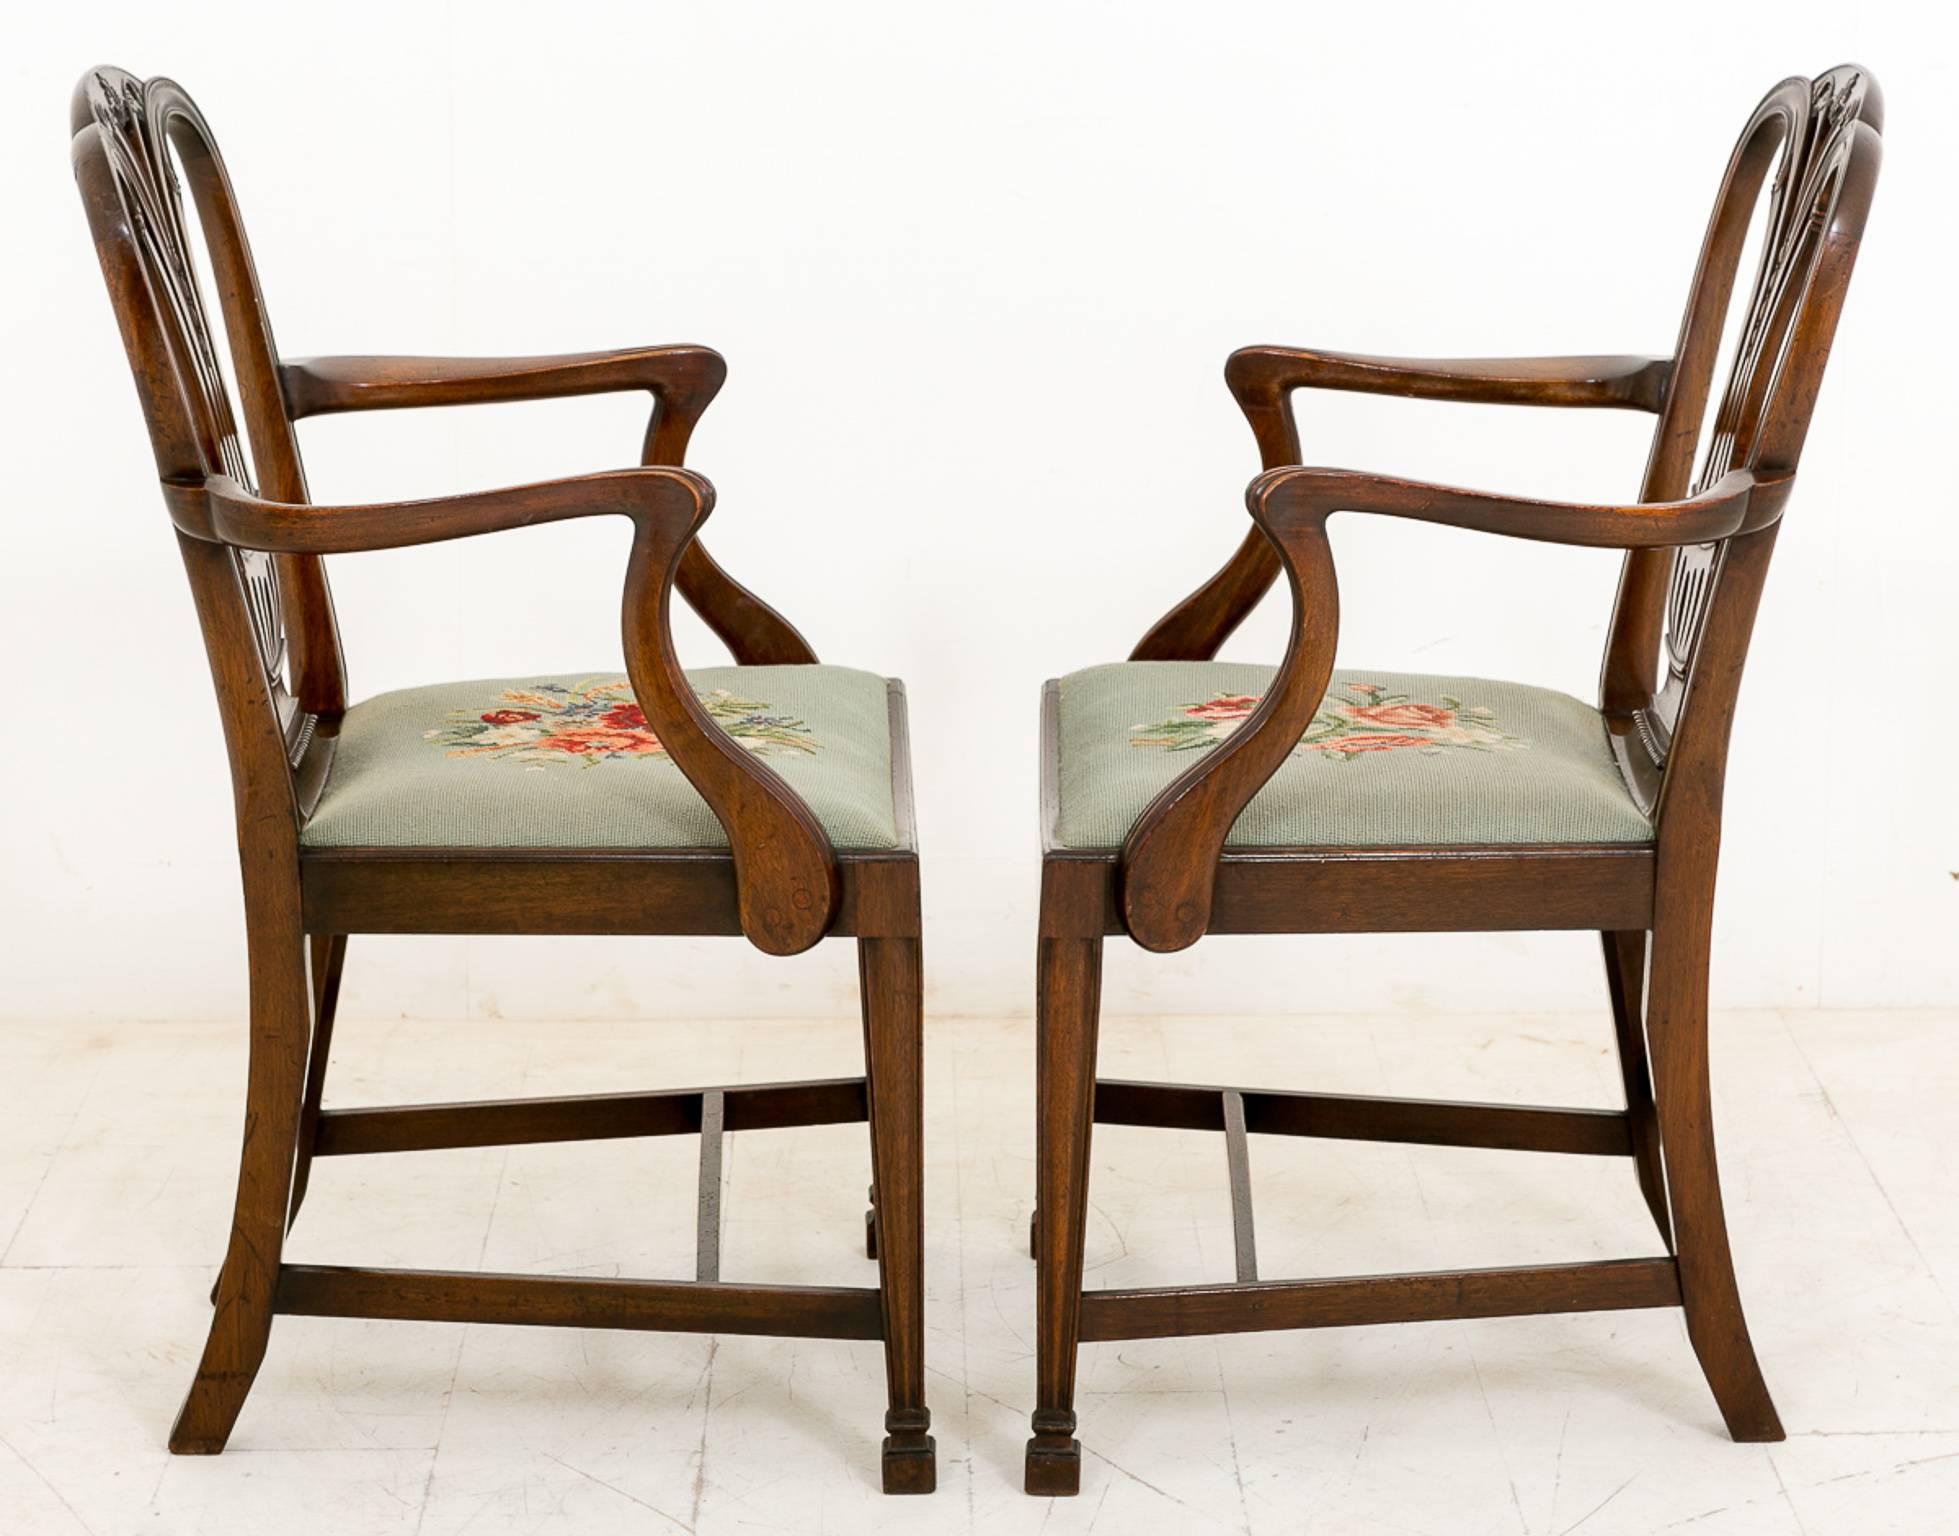 British Pair of Mahogany Hepplewhite Influenced Carver Chairs For Sale